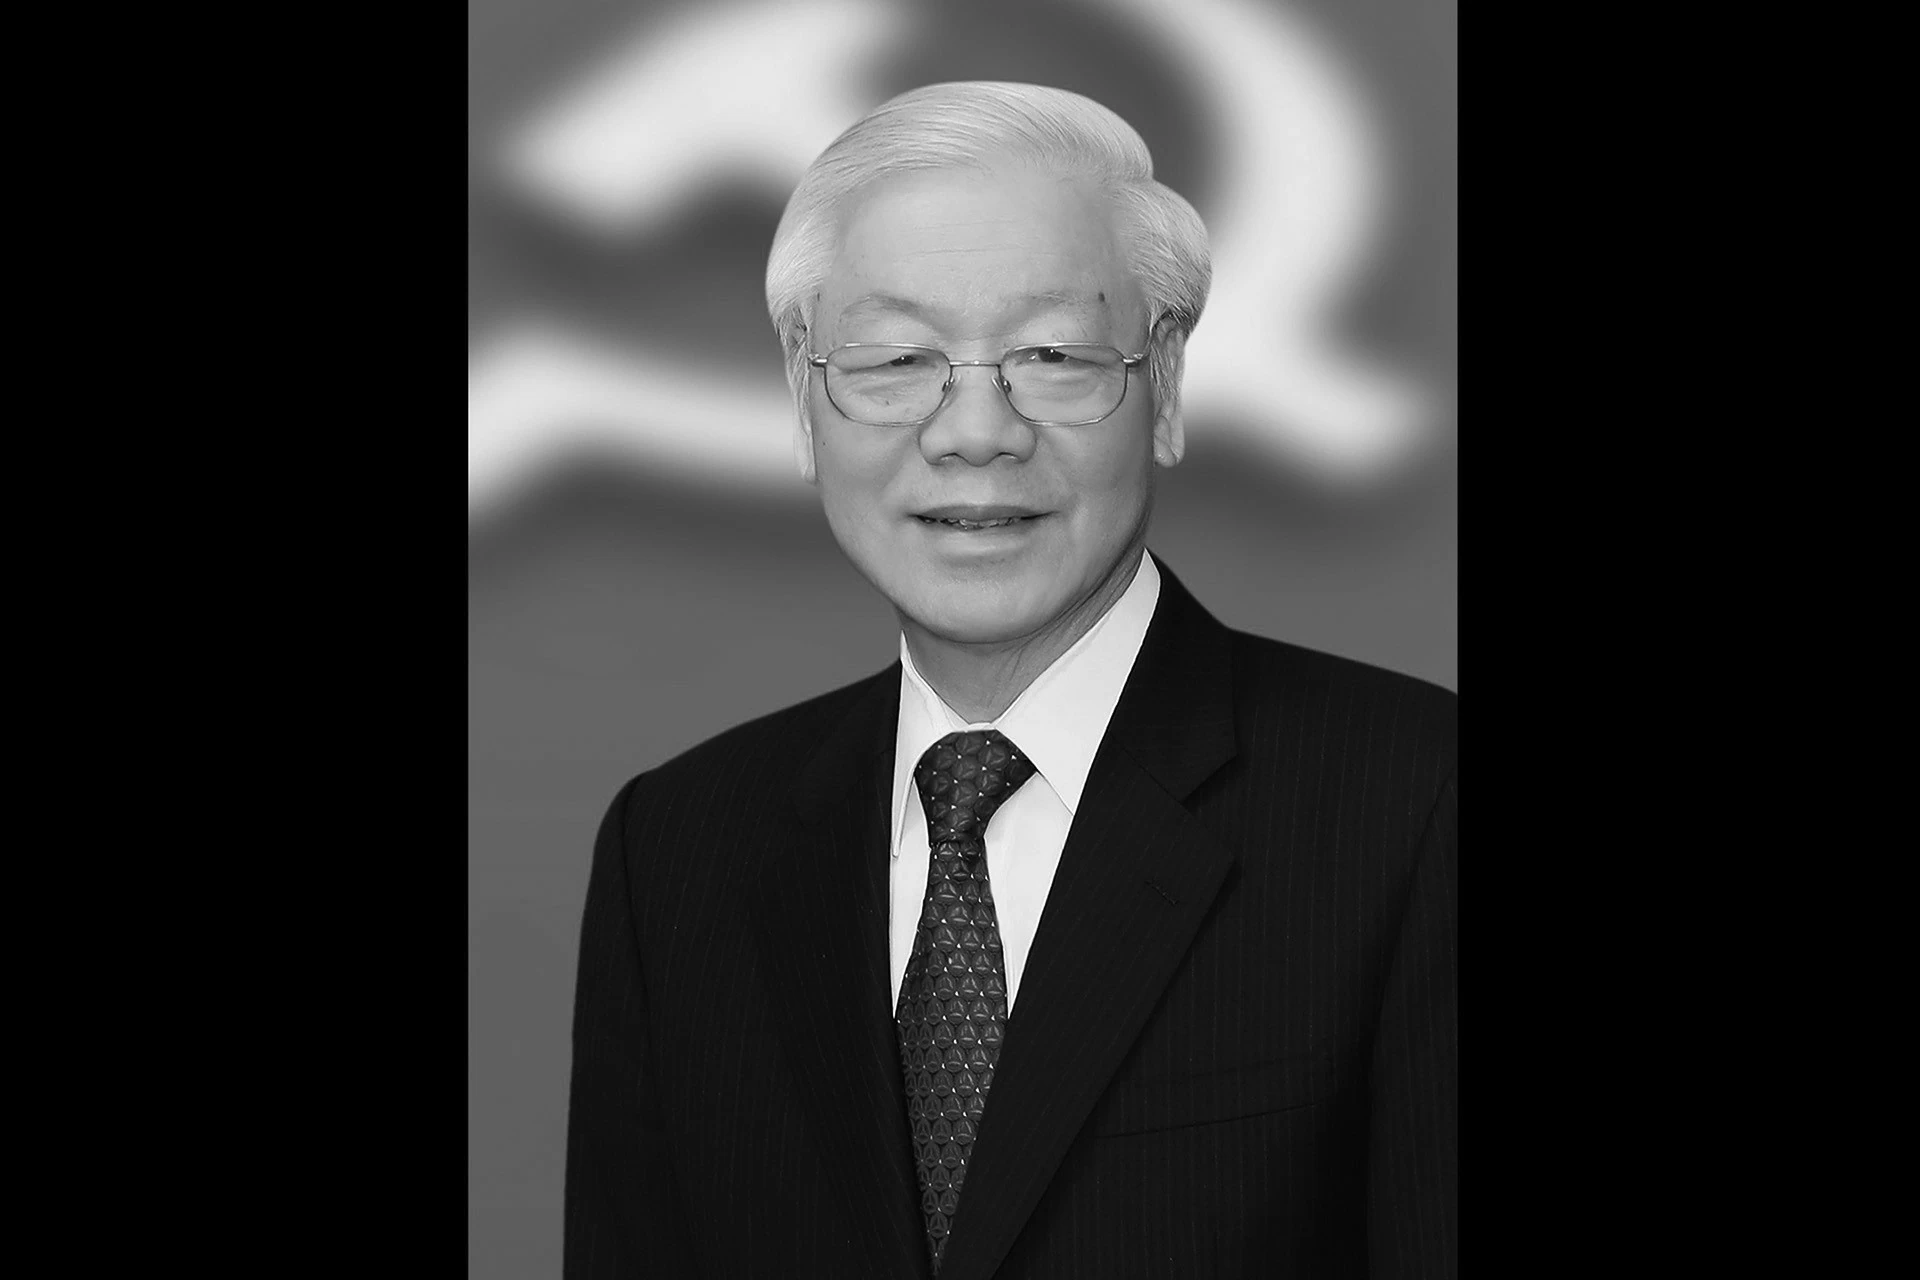 Parliament of India extends condolences to Vietnam on Party General Secretary Nguyen Phu Trong's passing